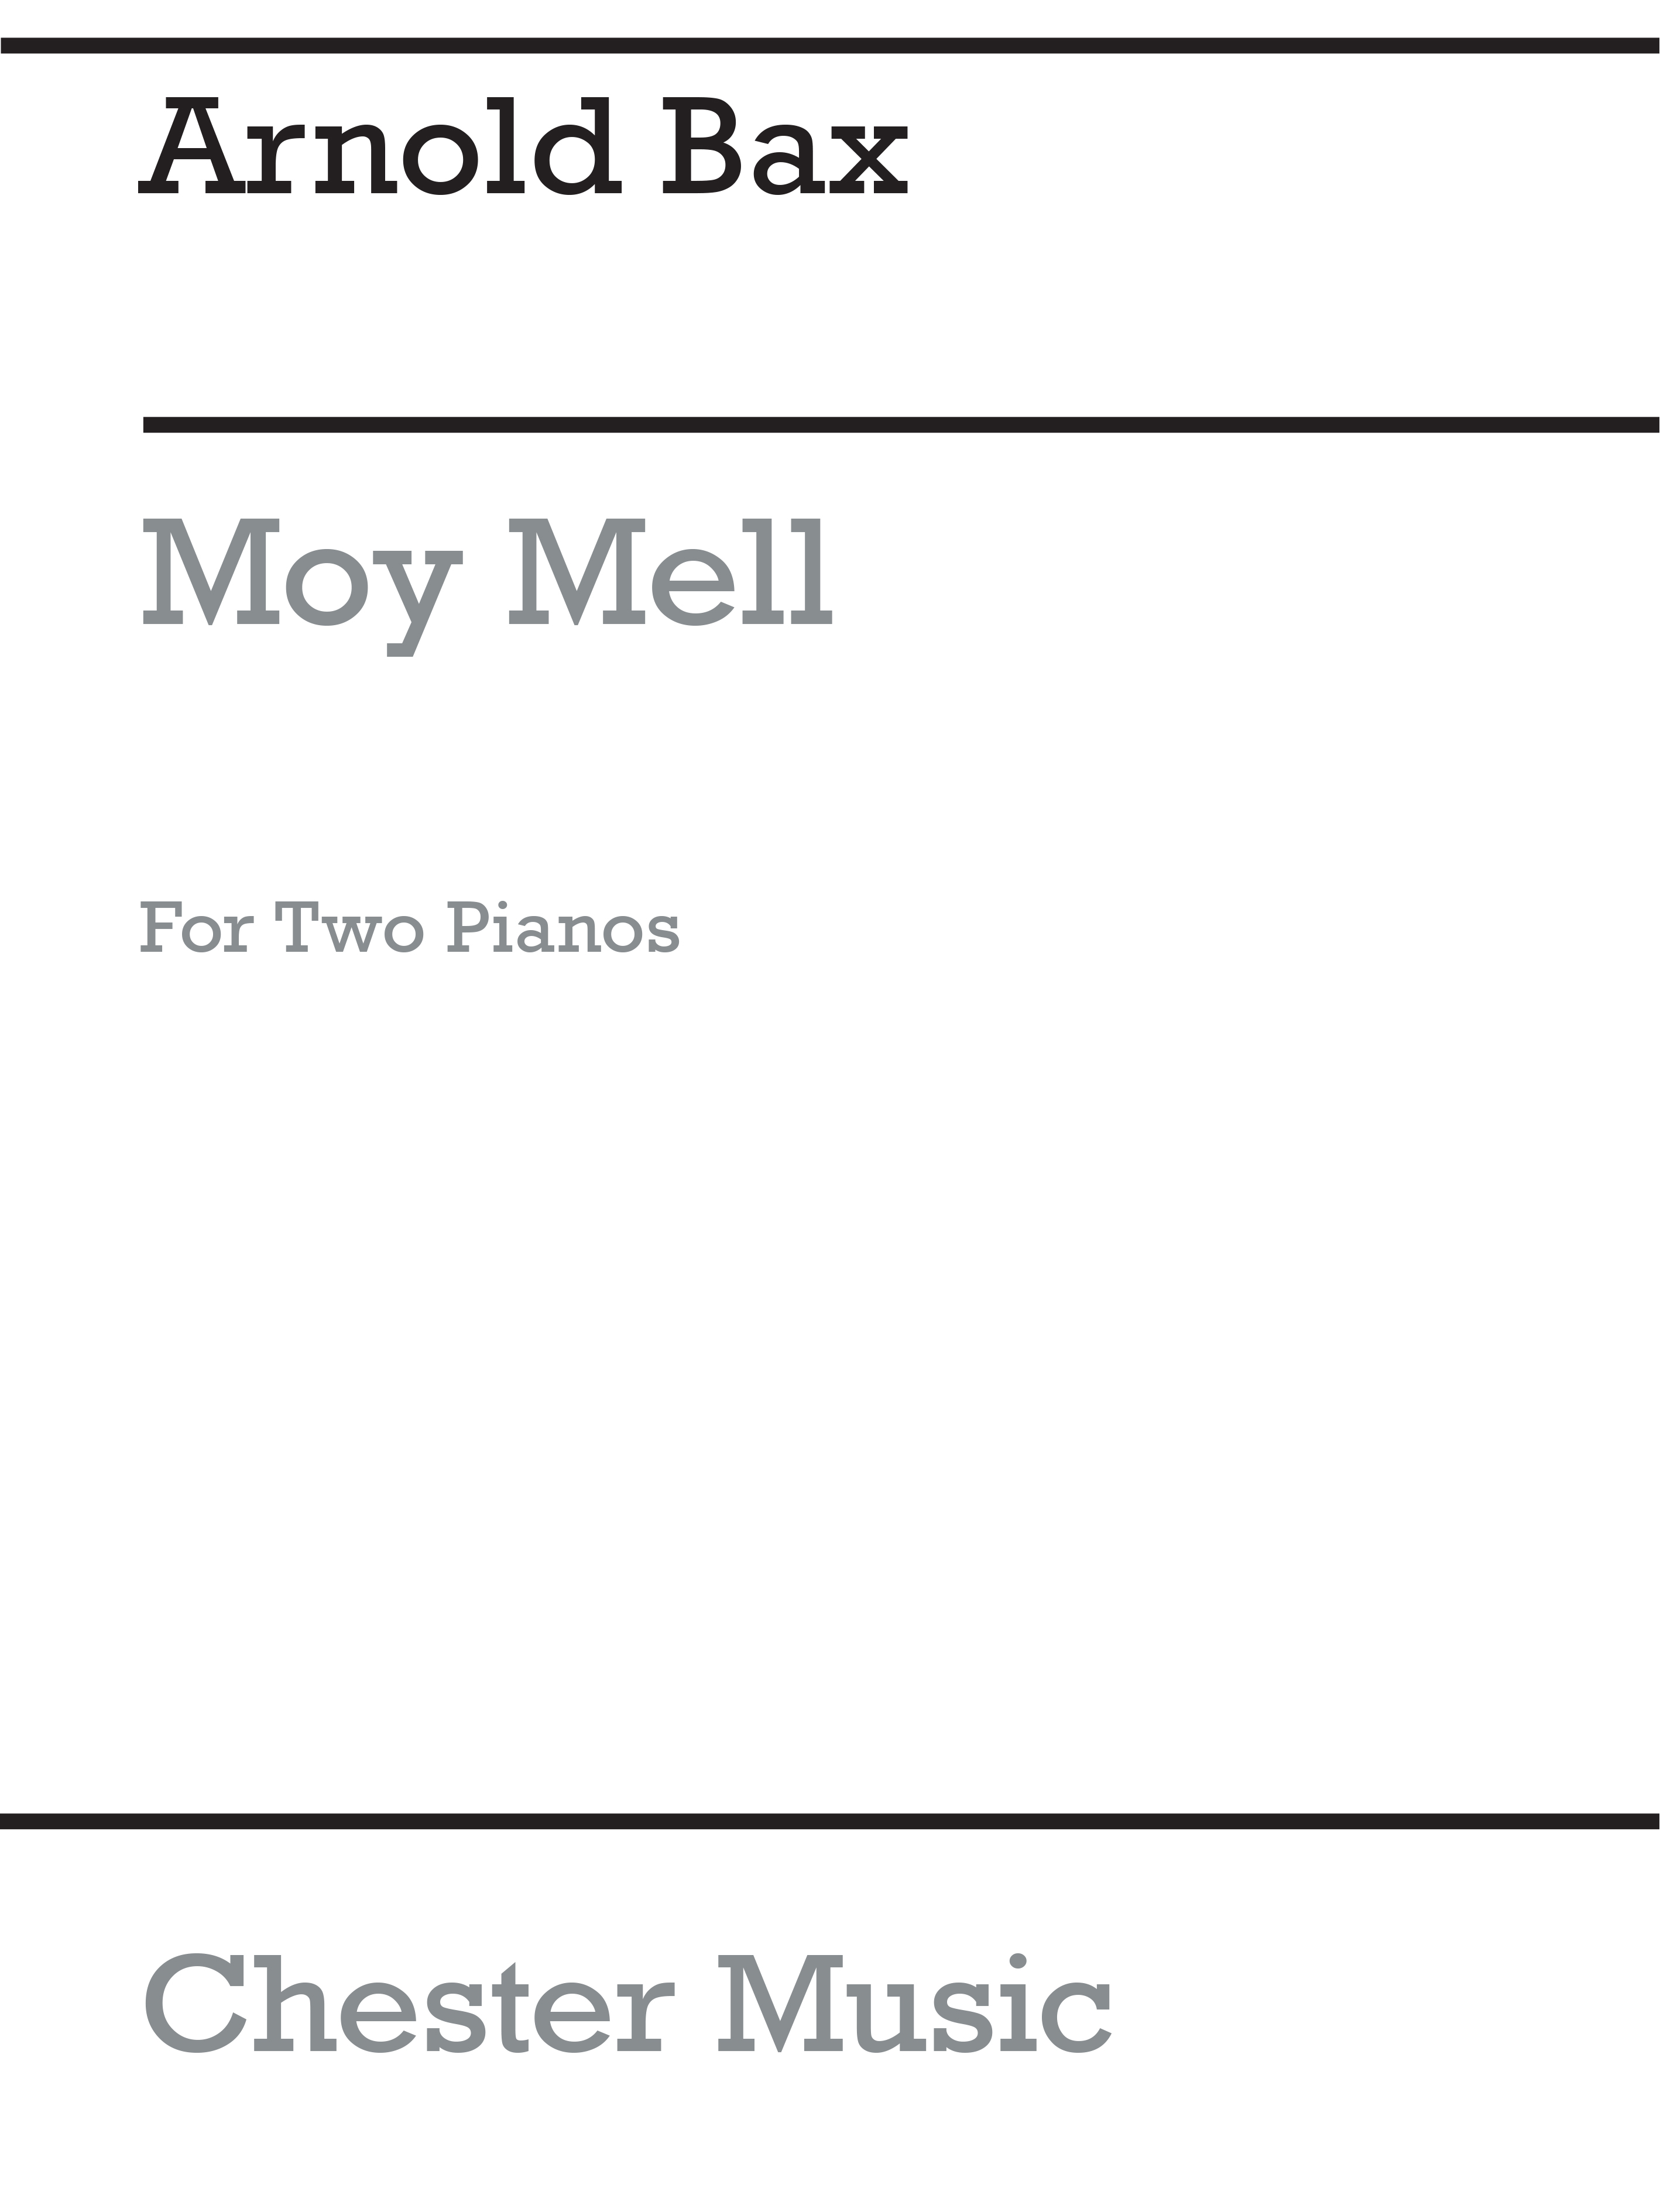 Arnold Bax: Moy Mell (The Happy Plain): Piano Duet